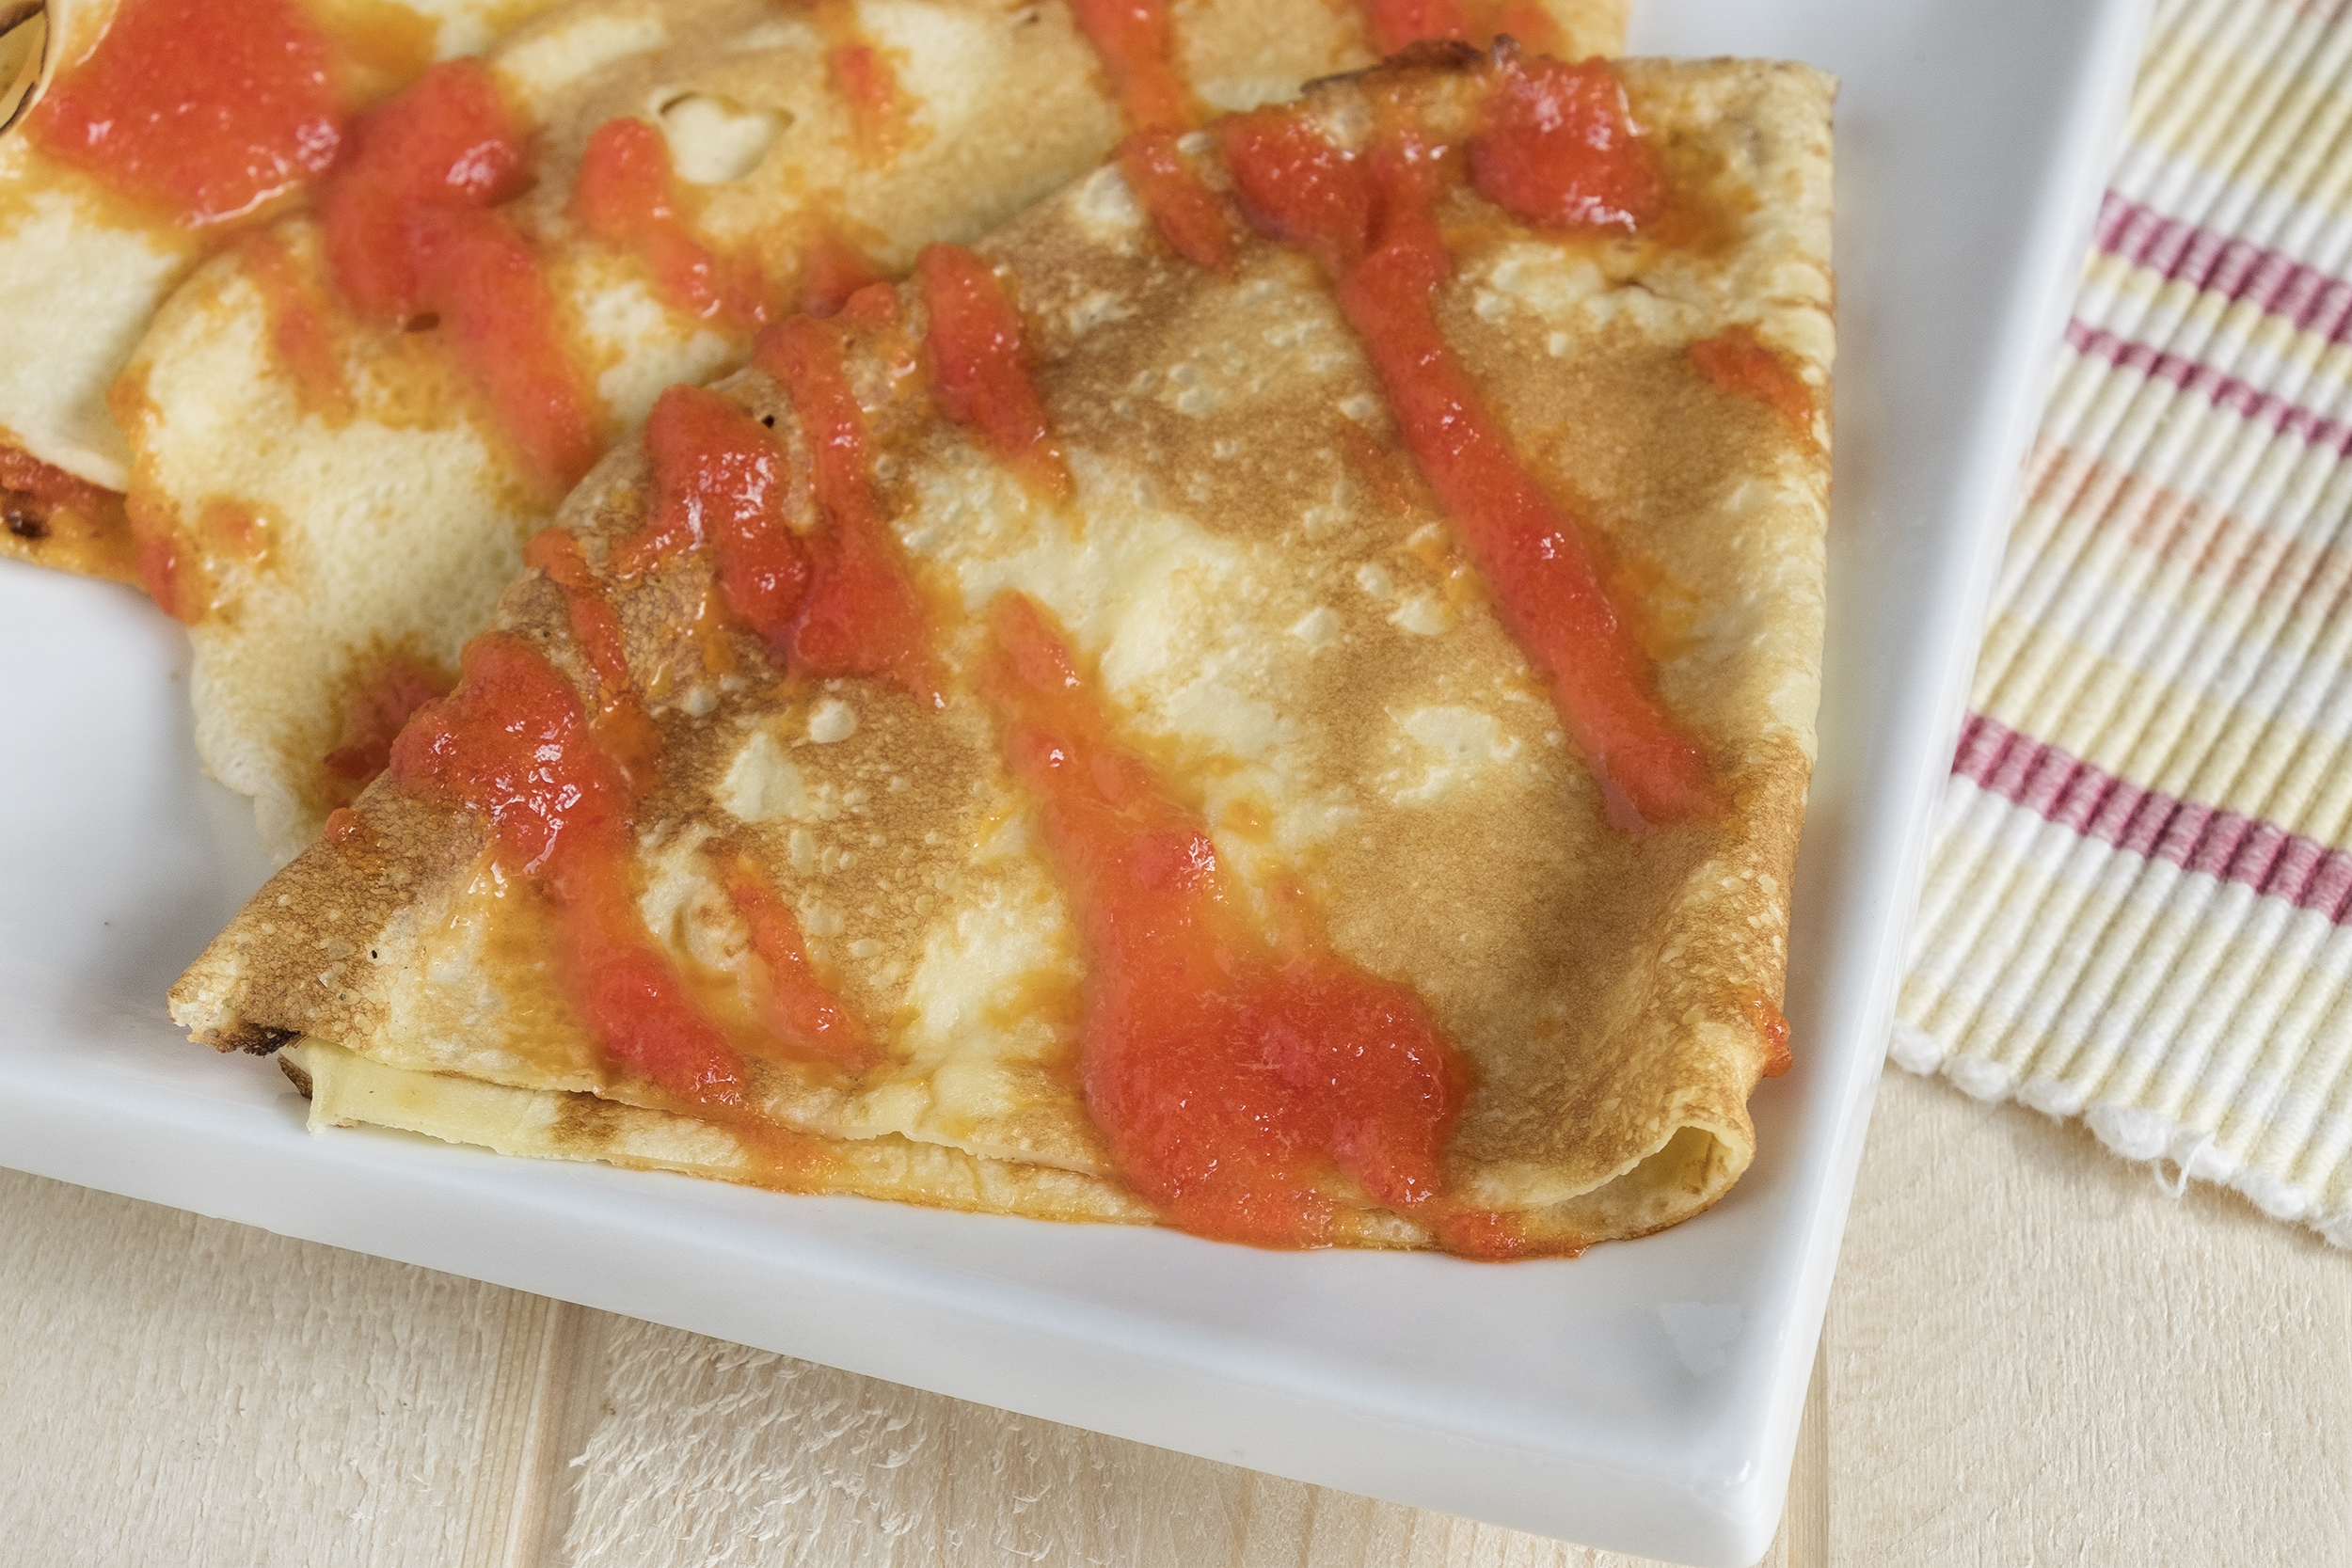 Get ready to smile with your mouth full! This recipe takes a breakfast and dessert favorite and turns it into a light and delicious crêpe.